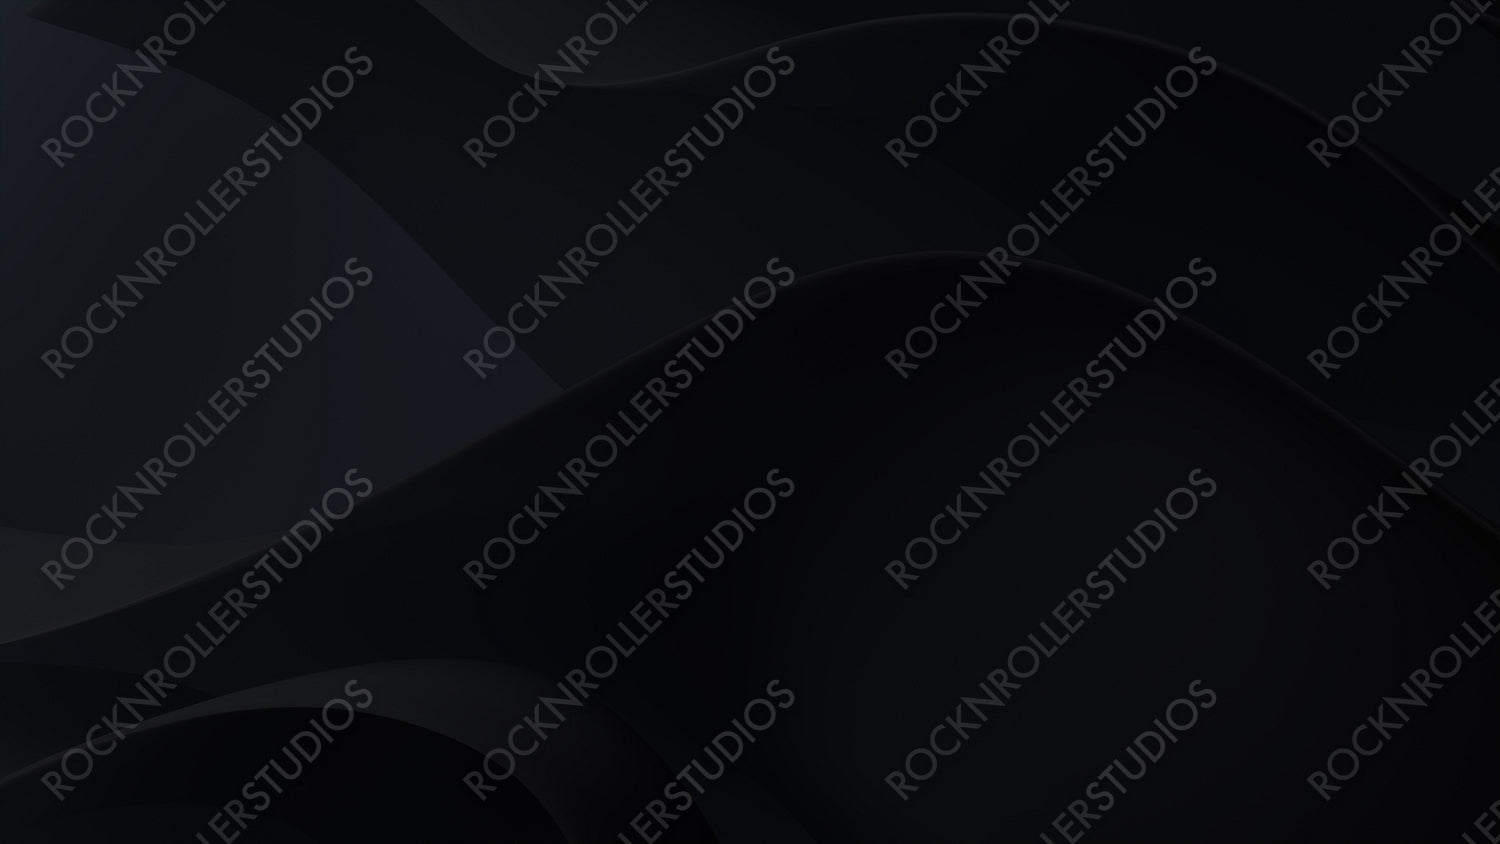 Black Wavy Layers. Elegant Abstract 3D Background. 3D Render.